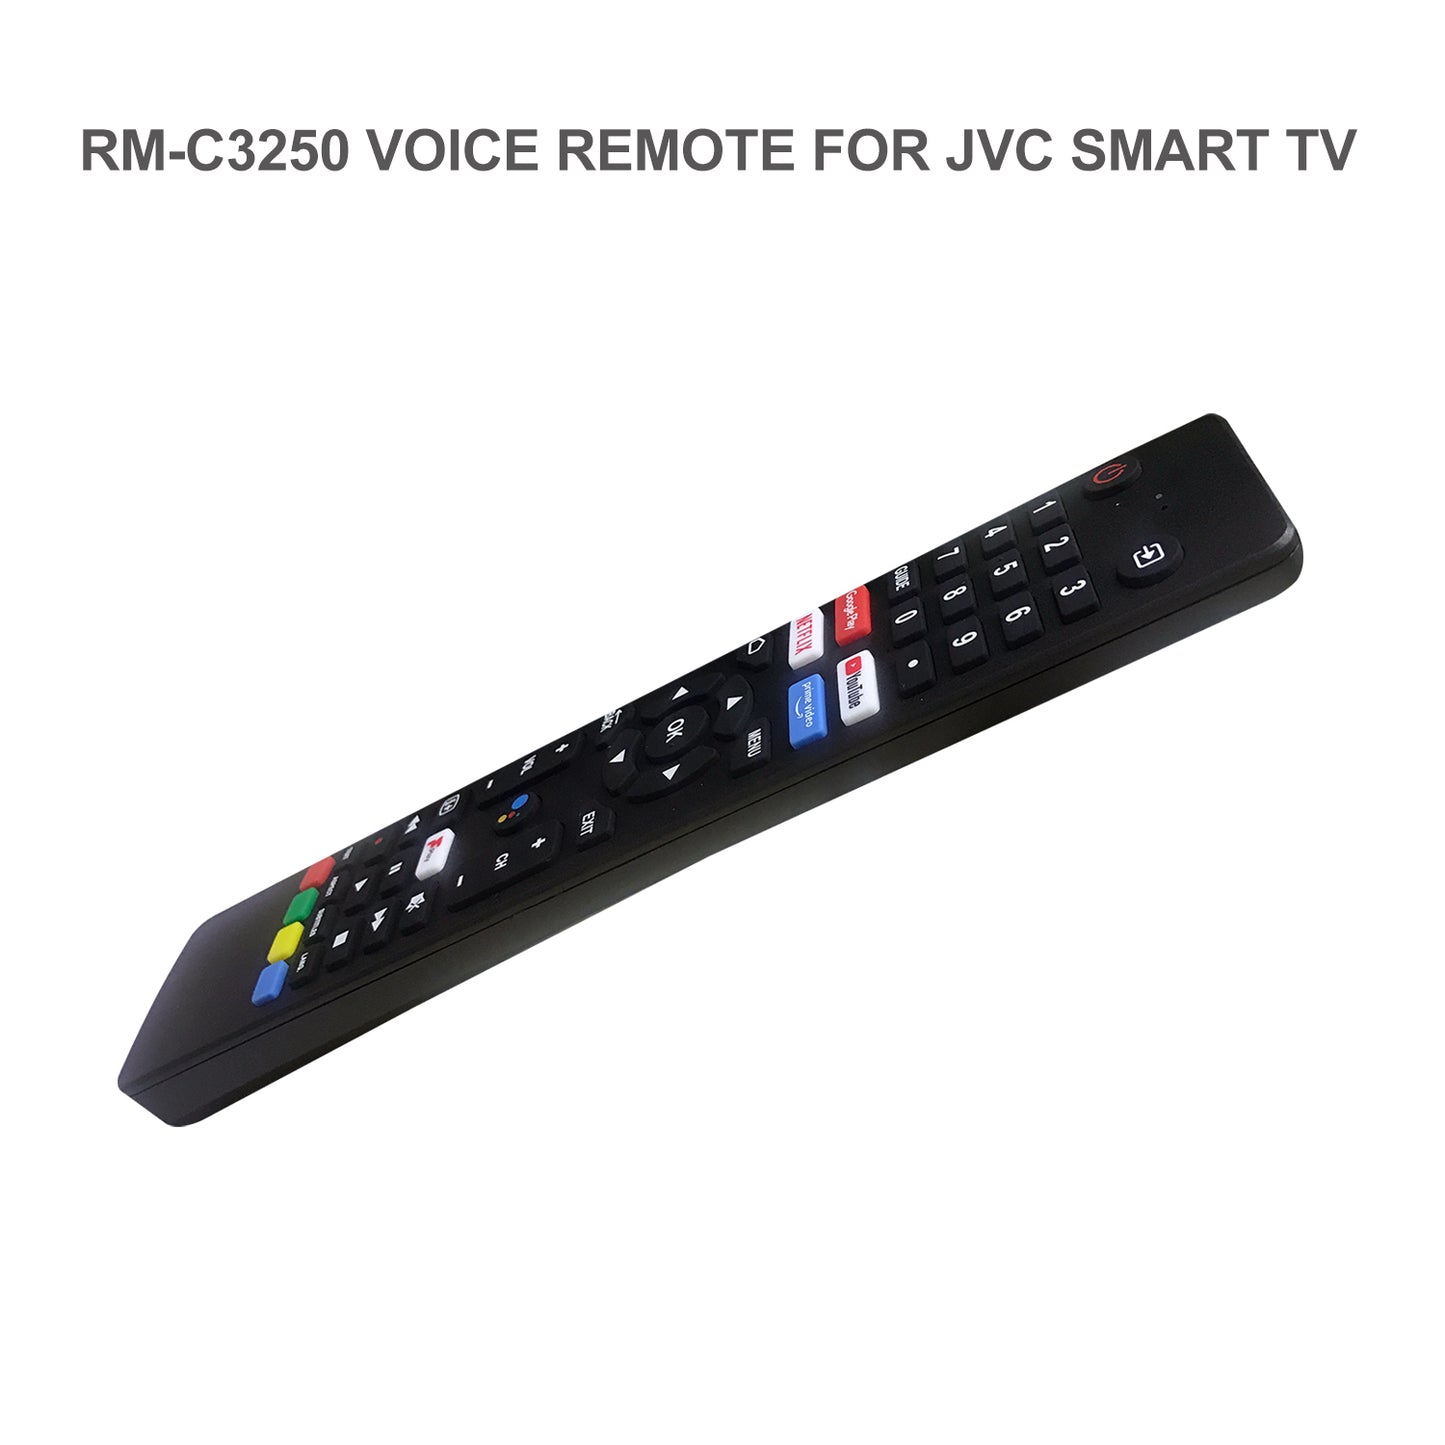 JCV01 C3250 TV Remote Control For JVC and Polaroid TV With Voice Command Function